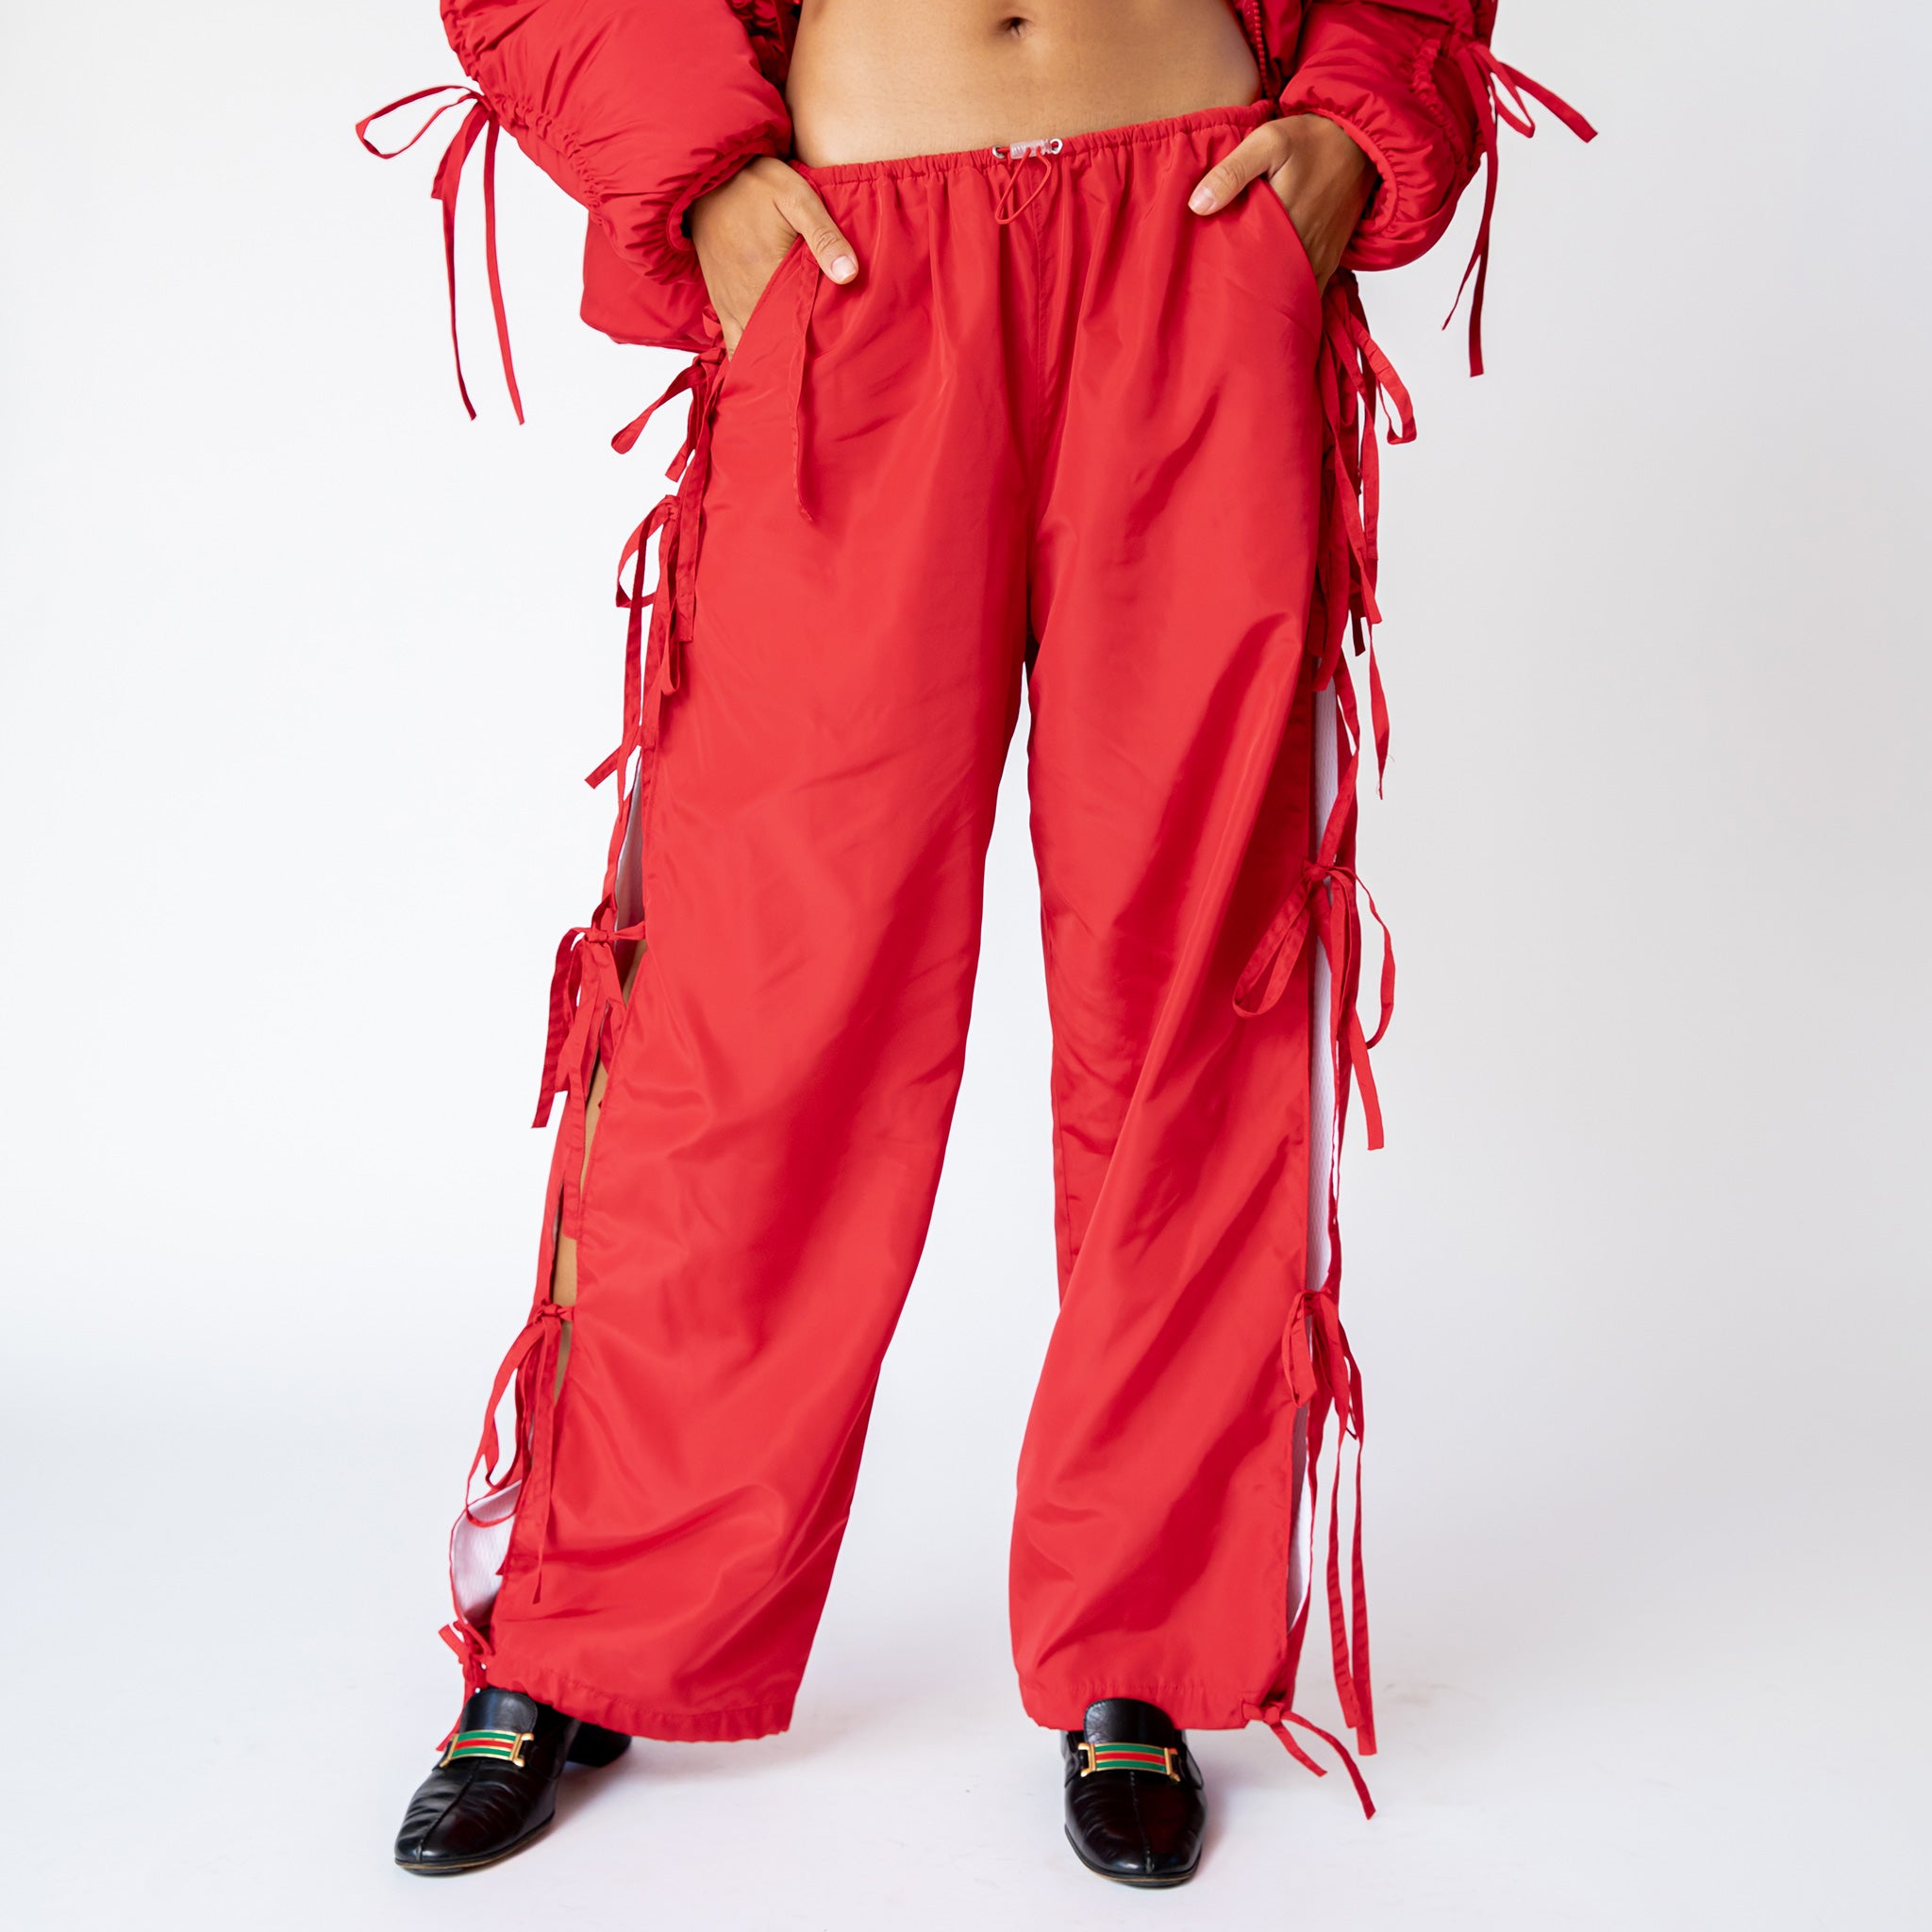 Front half body photo of model wearing the Cam Pants in the color red with bow details down the side.